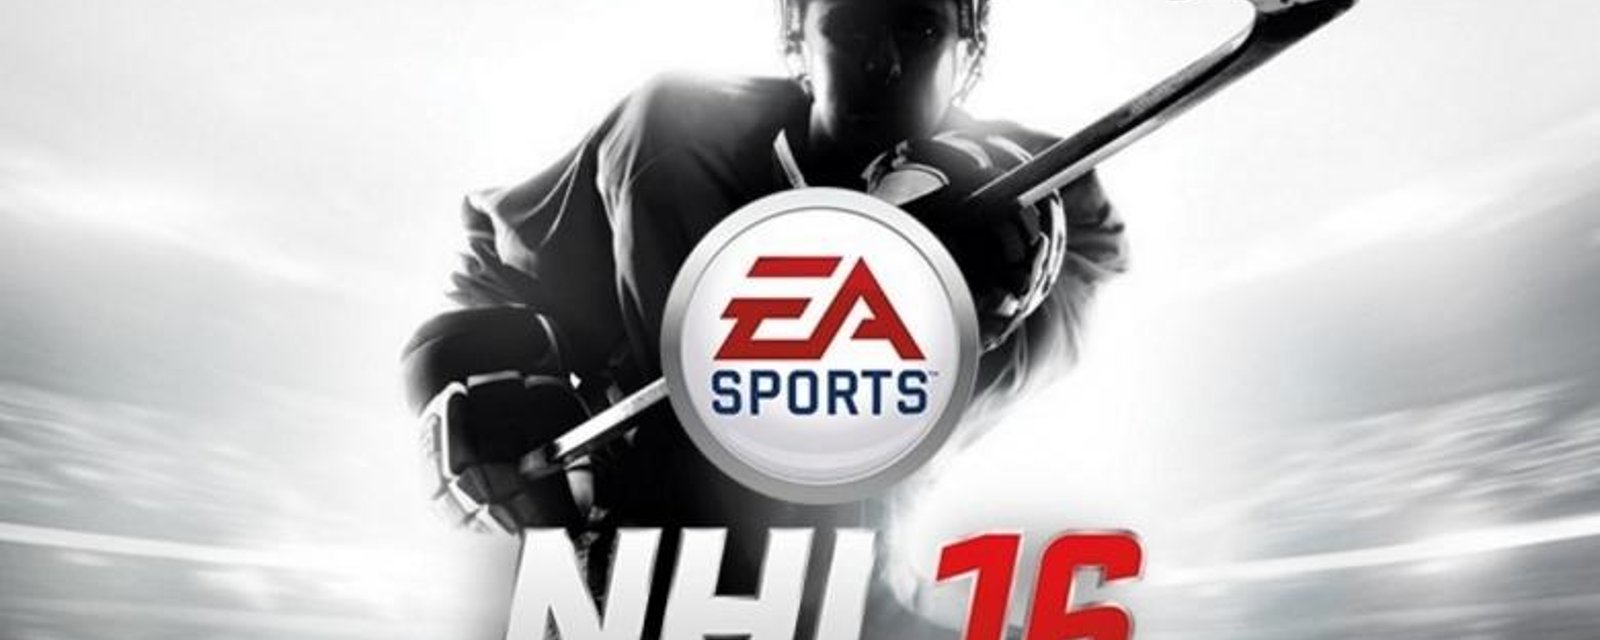 EA Sports has used NHL 16 to simulate the Stanley Cup Playoffs.